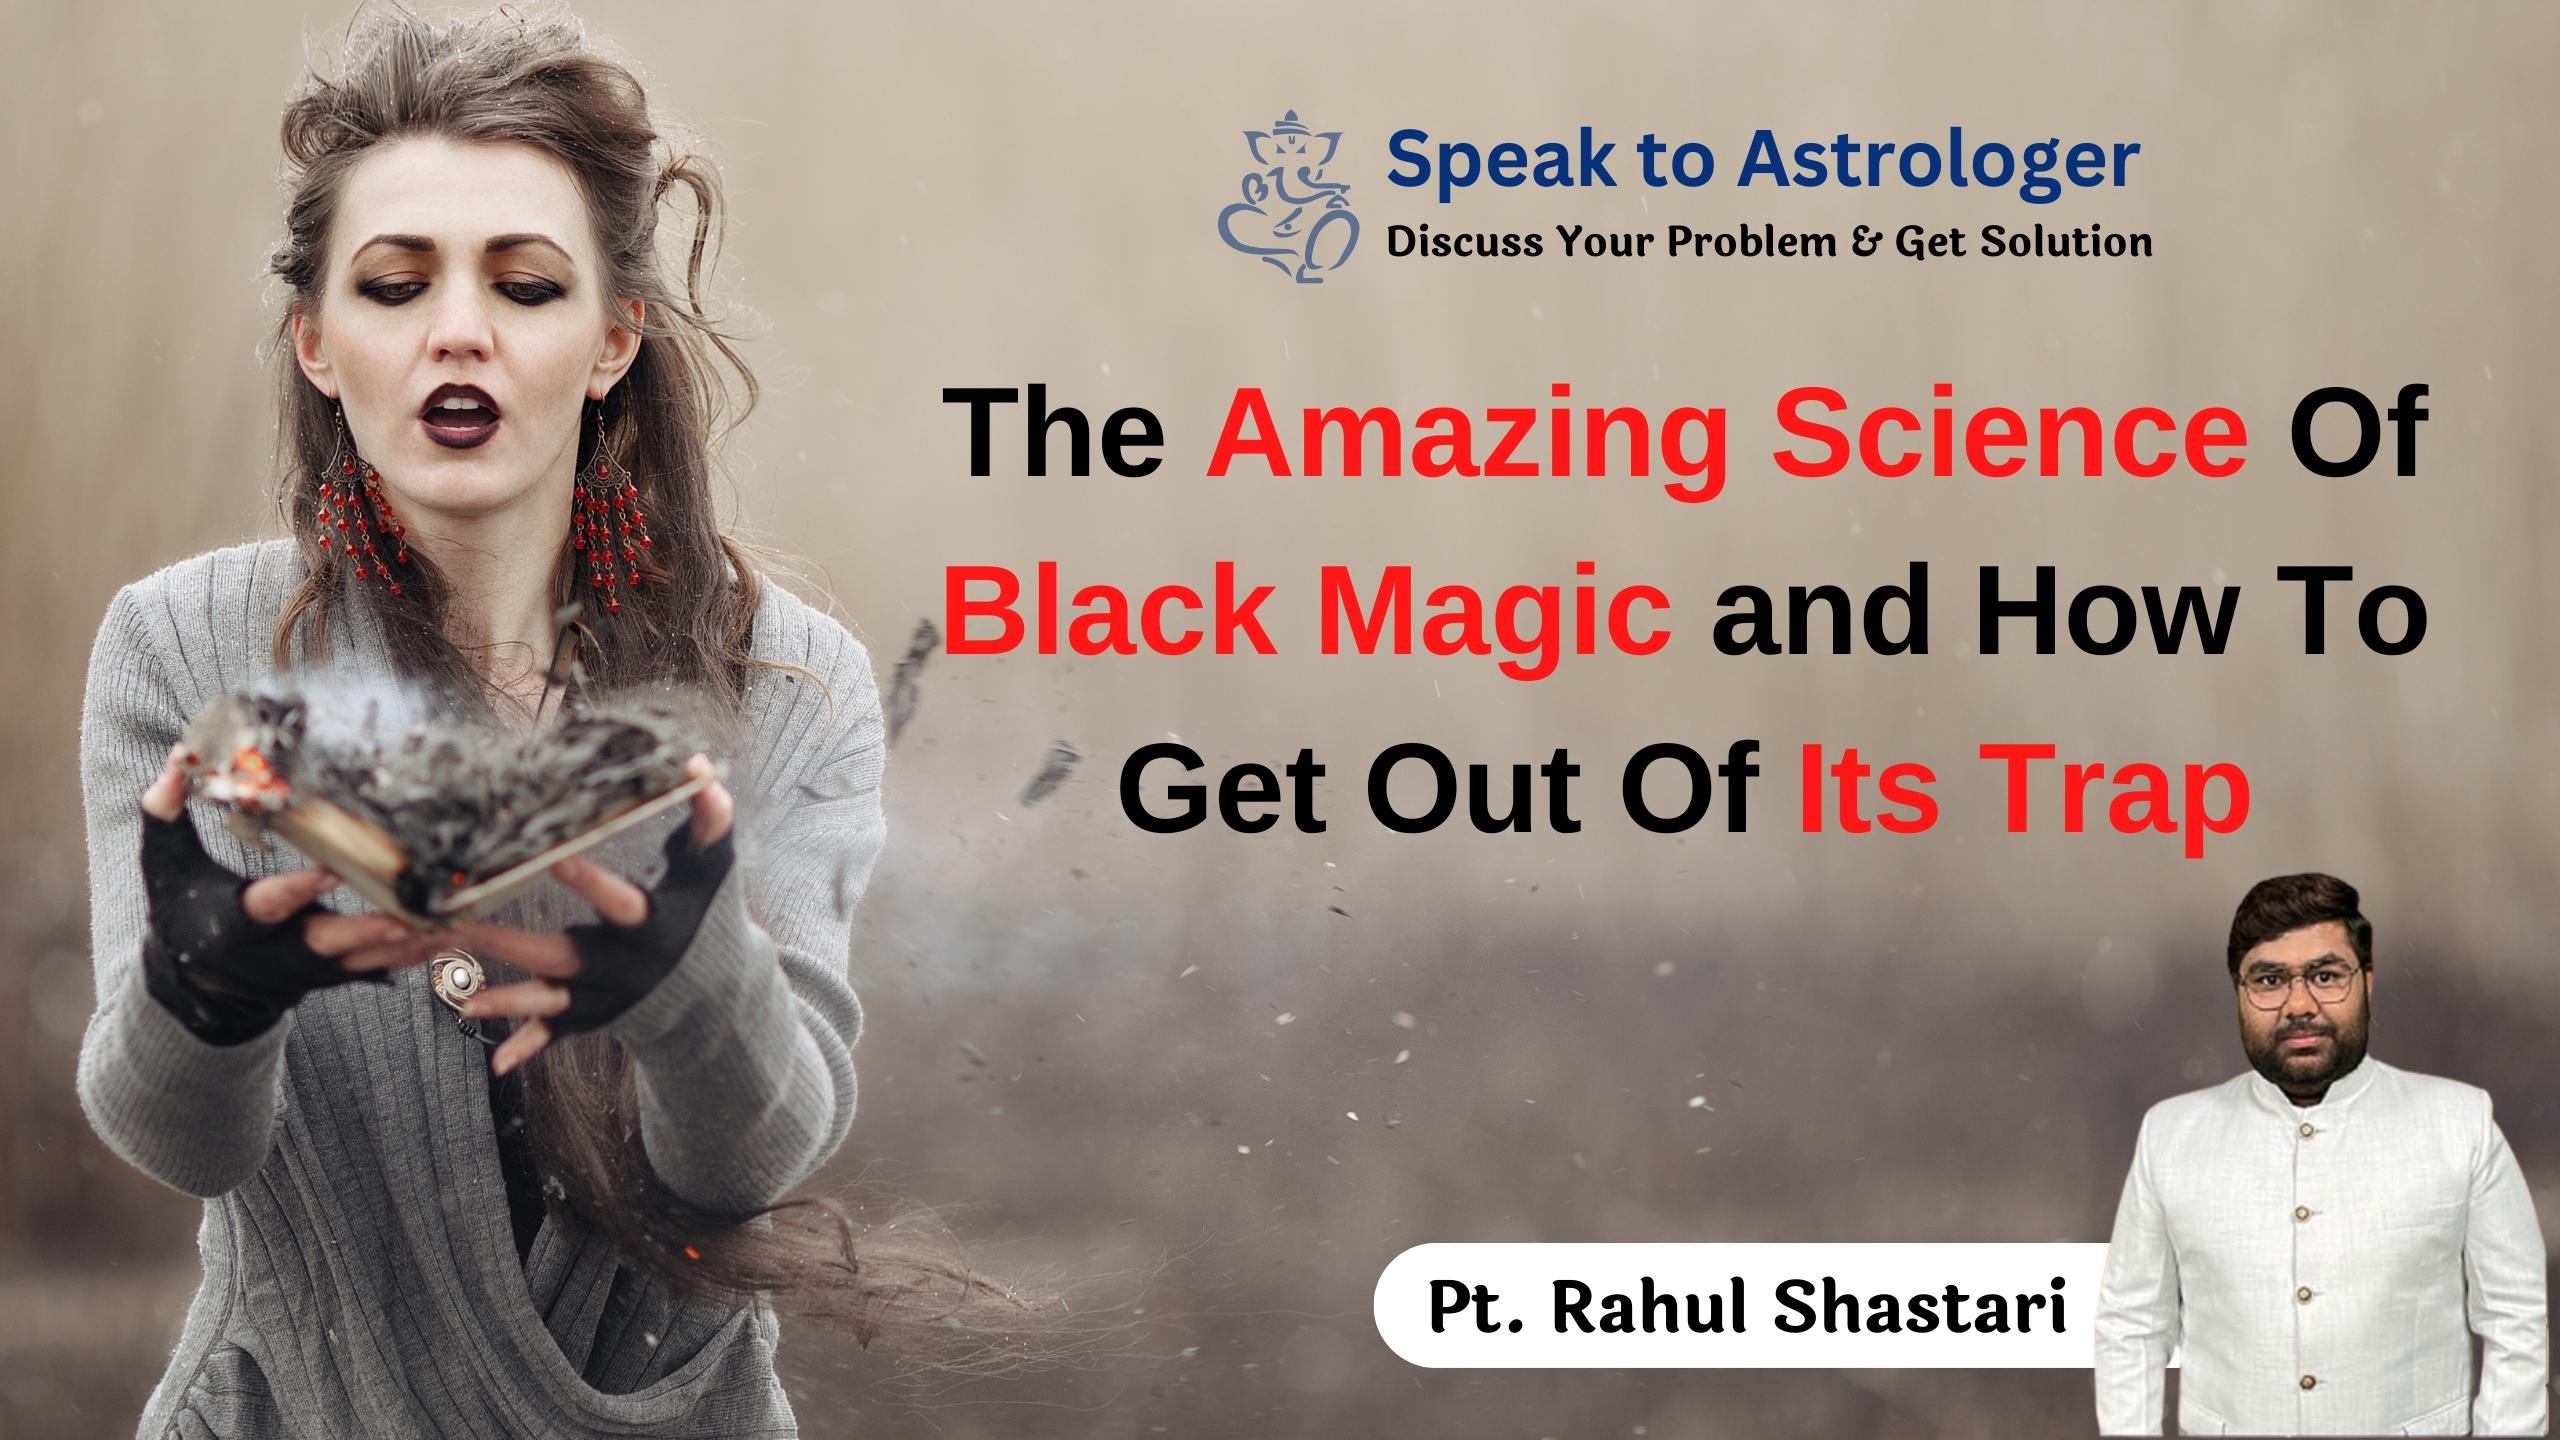 The Amazing Science Of Black Magic and How To Get Out Of Its Trap